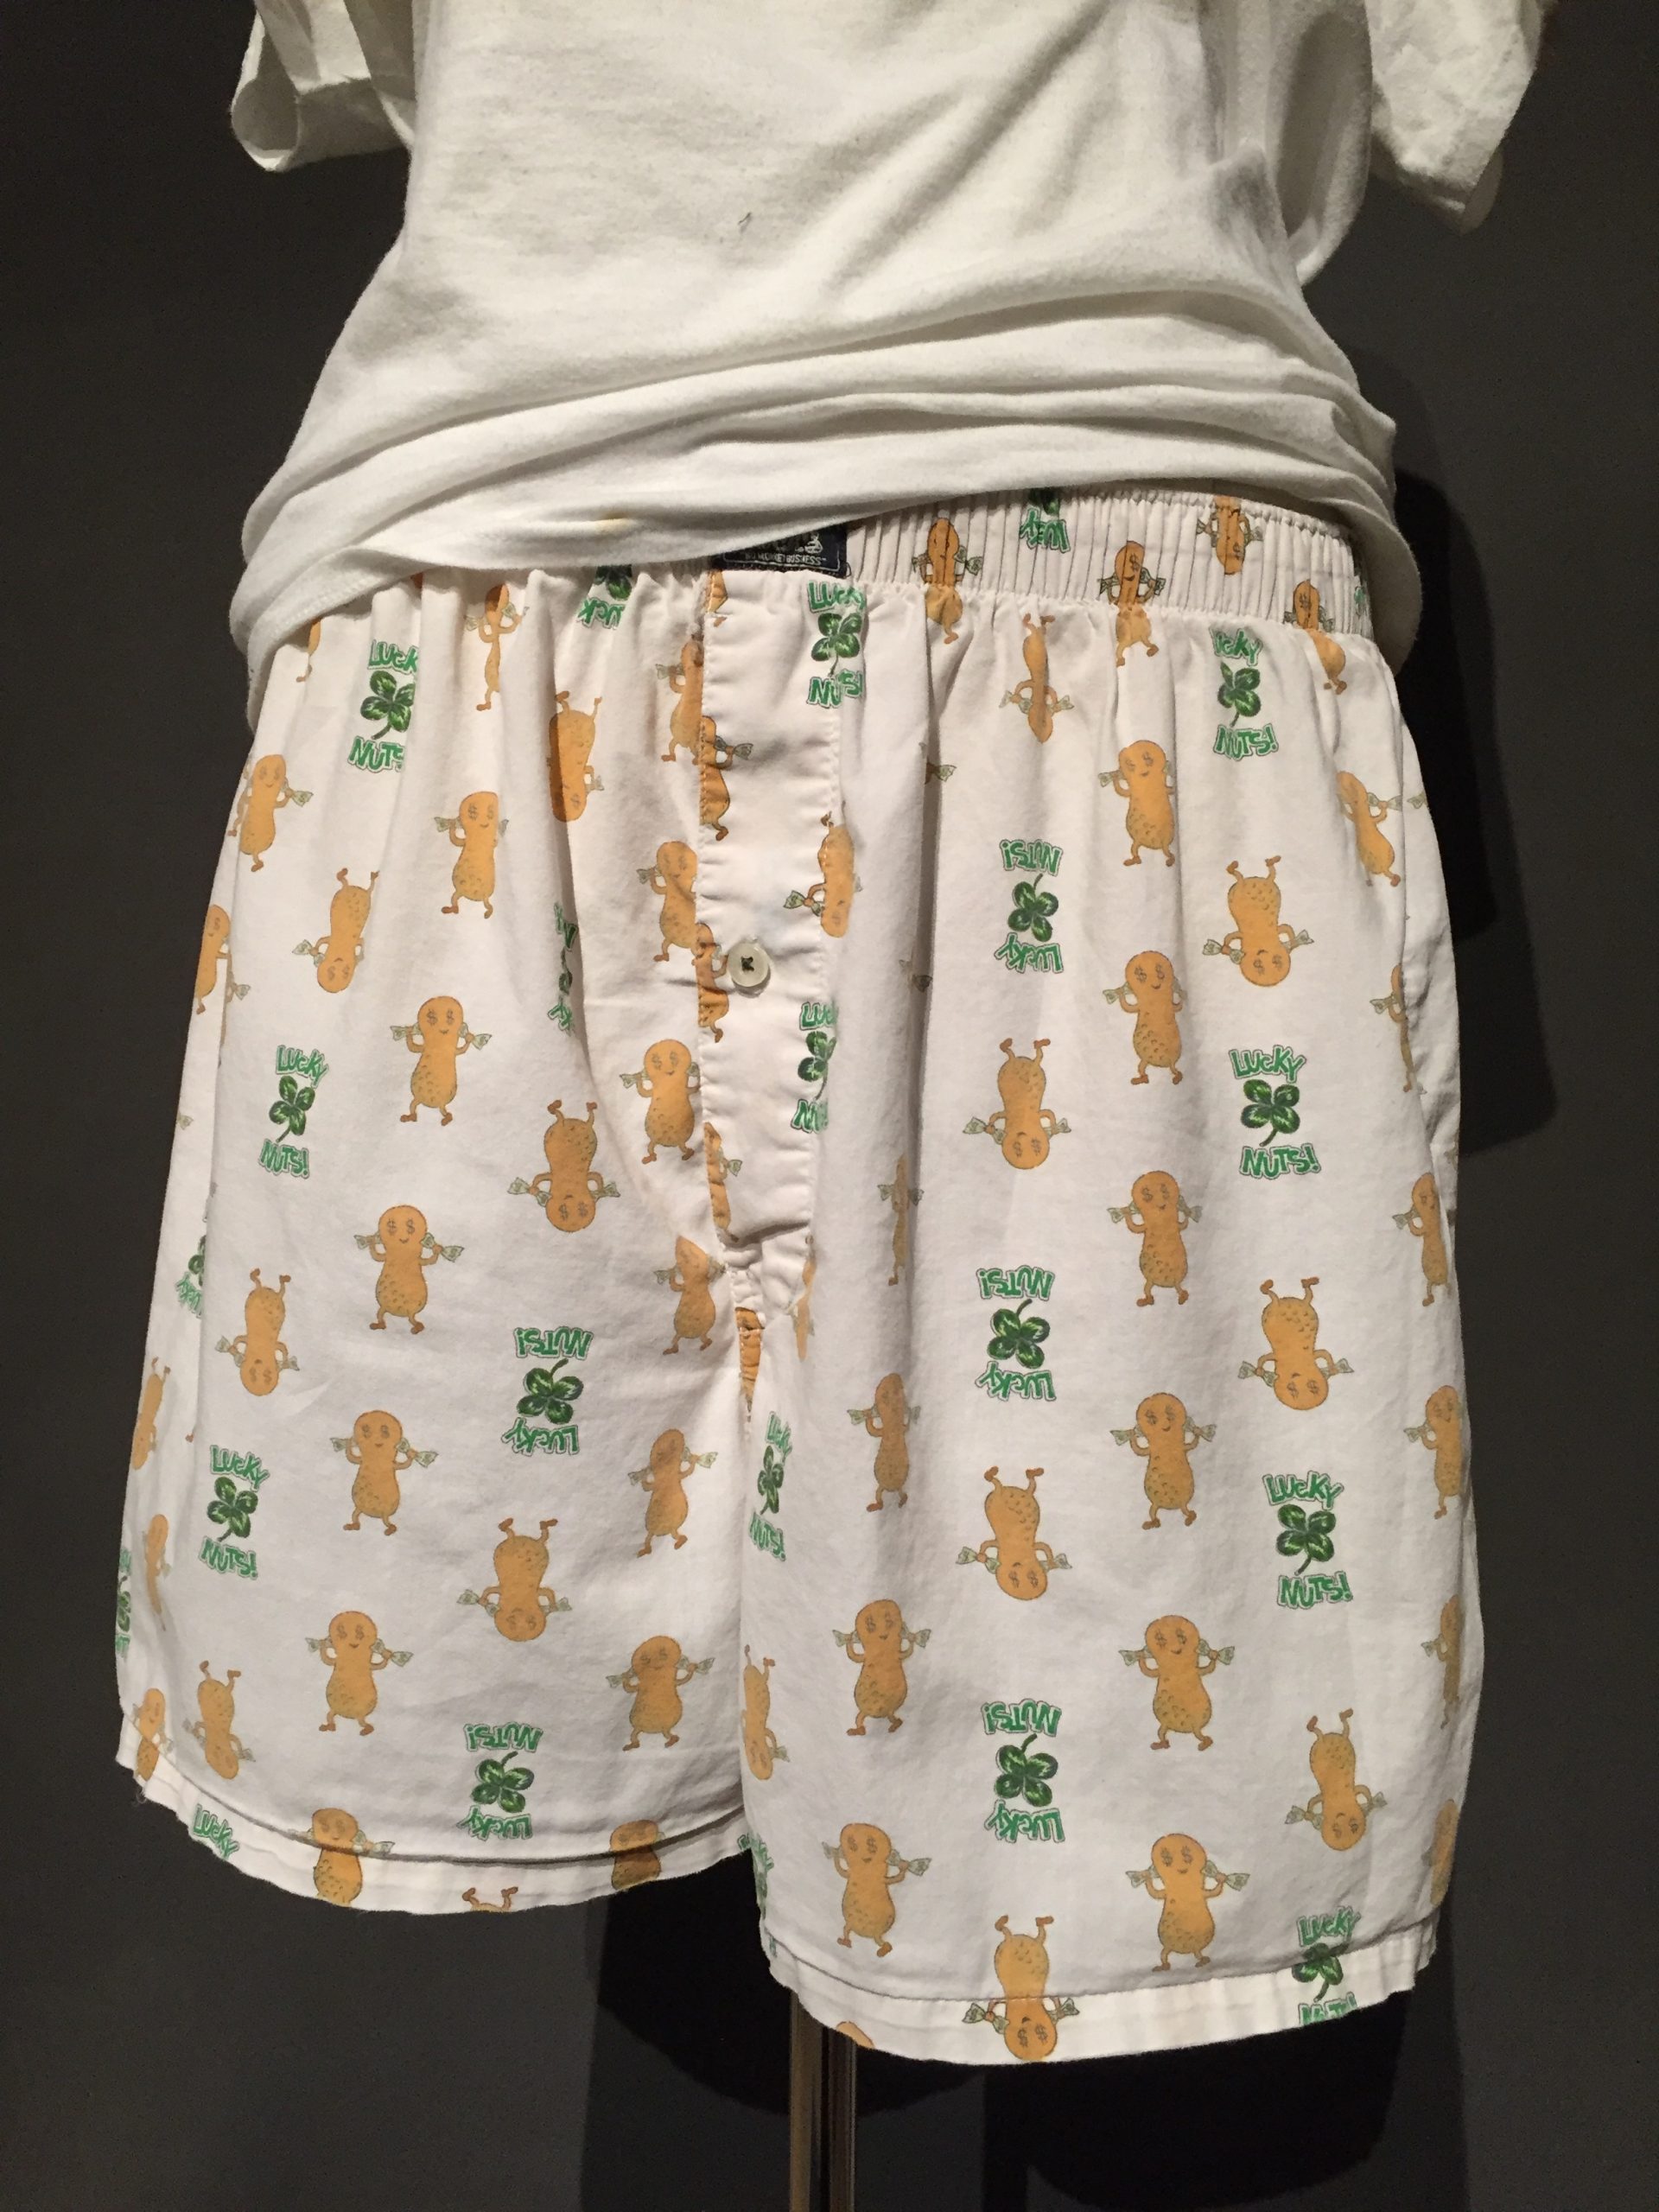 Close-up of white boxer shorts with print featuring peanuts and four-leaf clovers with text reading: "Lucky Nuts" paired with white t-shirt